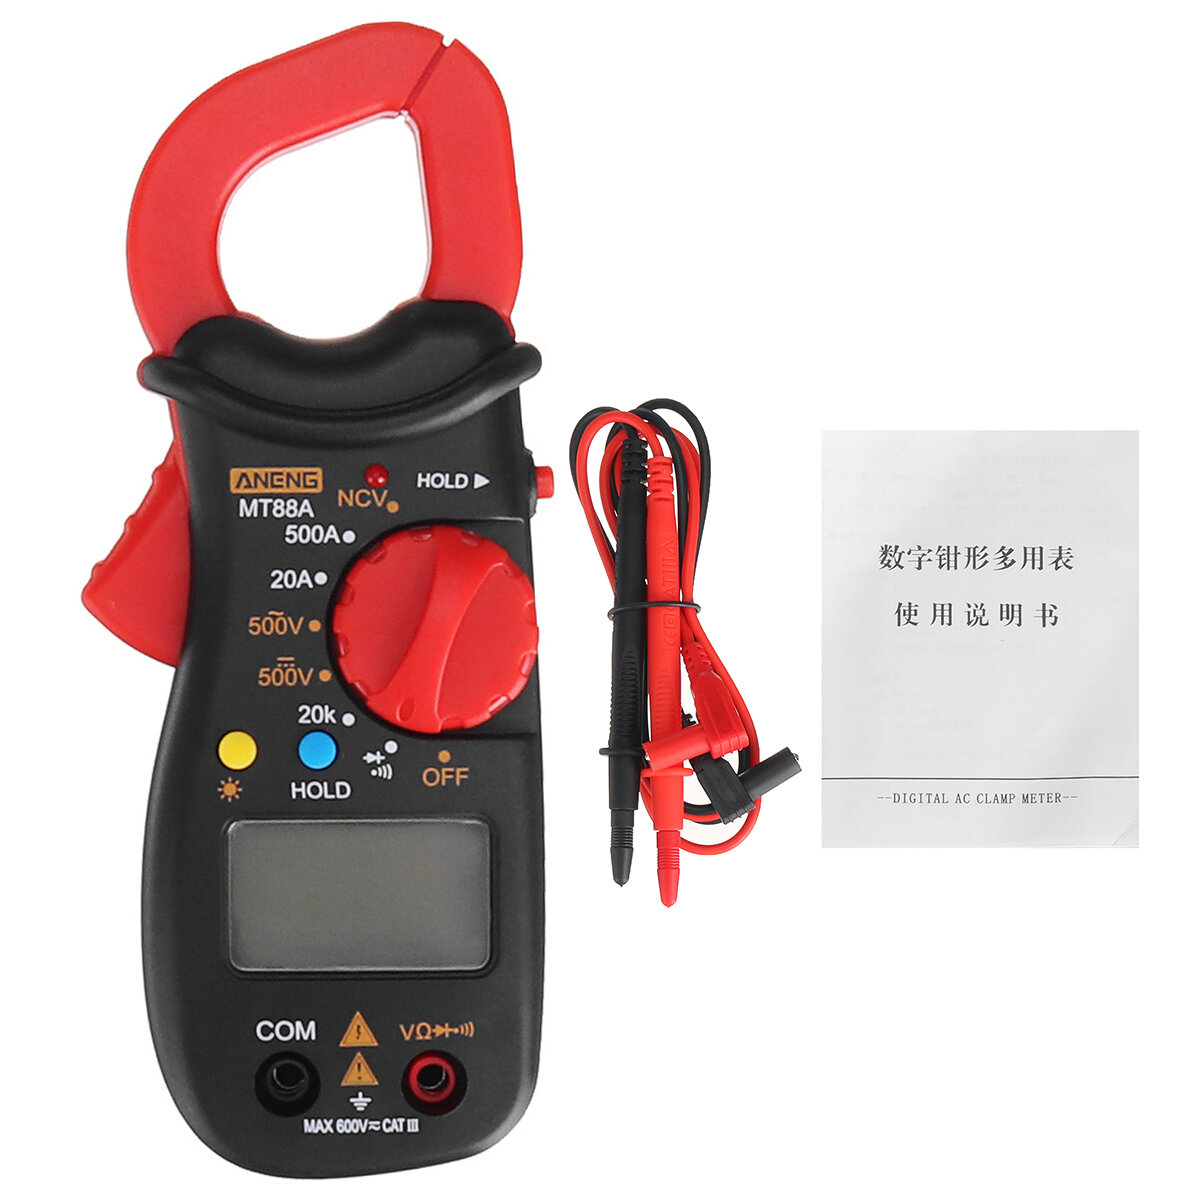 

ANENG MT88A Digital Clamp Meter Multimeter DC/AC Voltage AC Current Tester Frequency Capacitance NCV Tester Measuring To